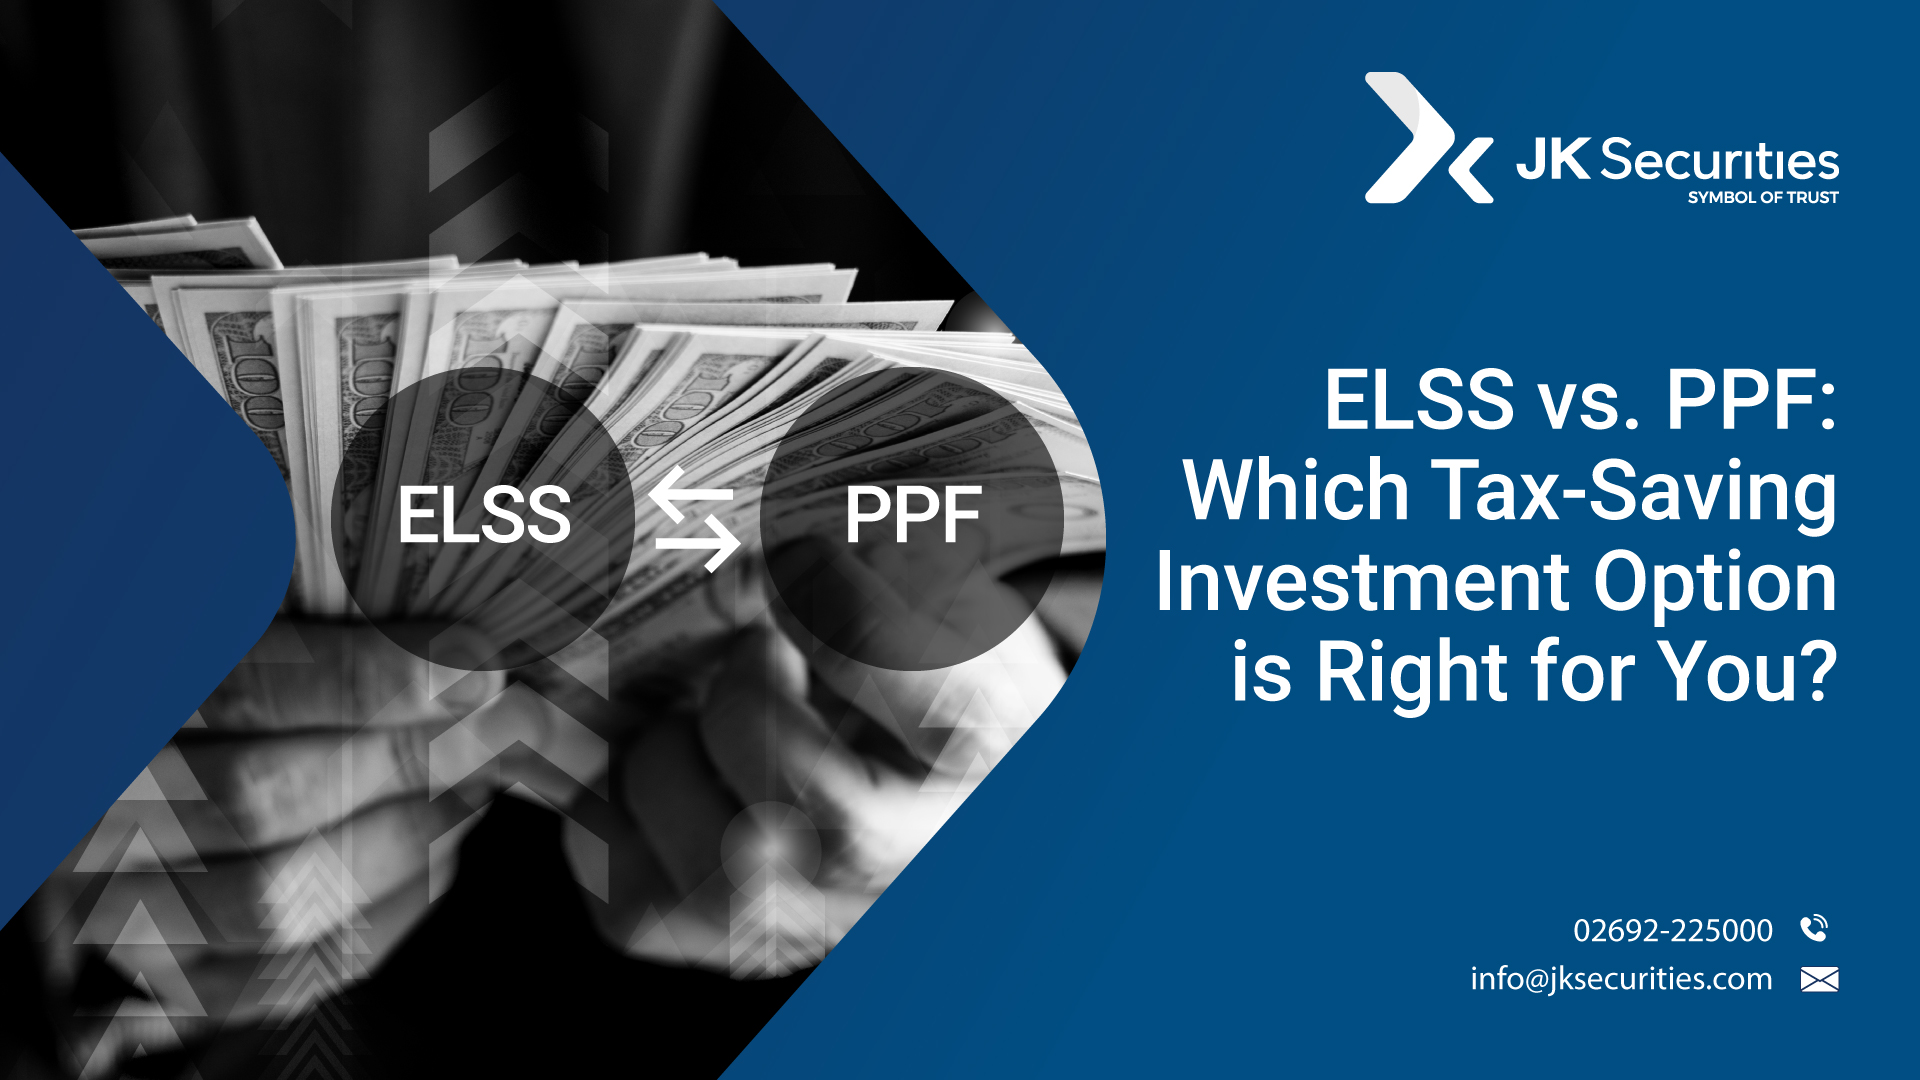 ELSS vs. PPF: Which Tax-Saving Investment Option is Right for You?